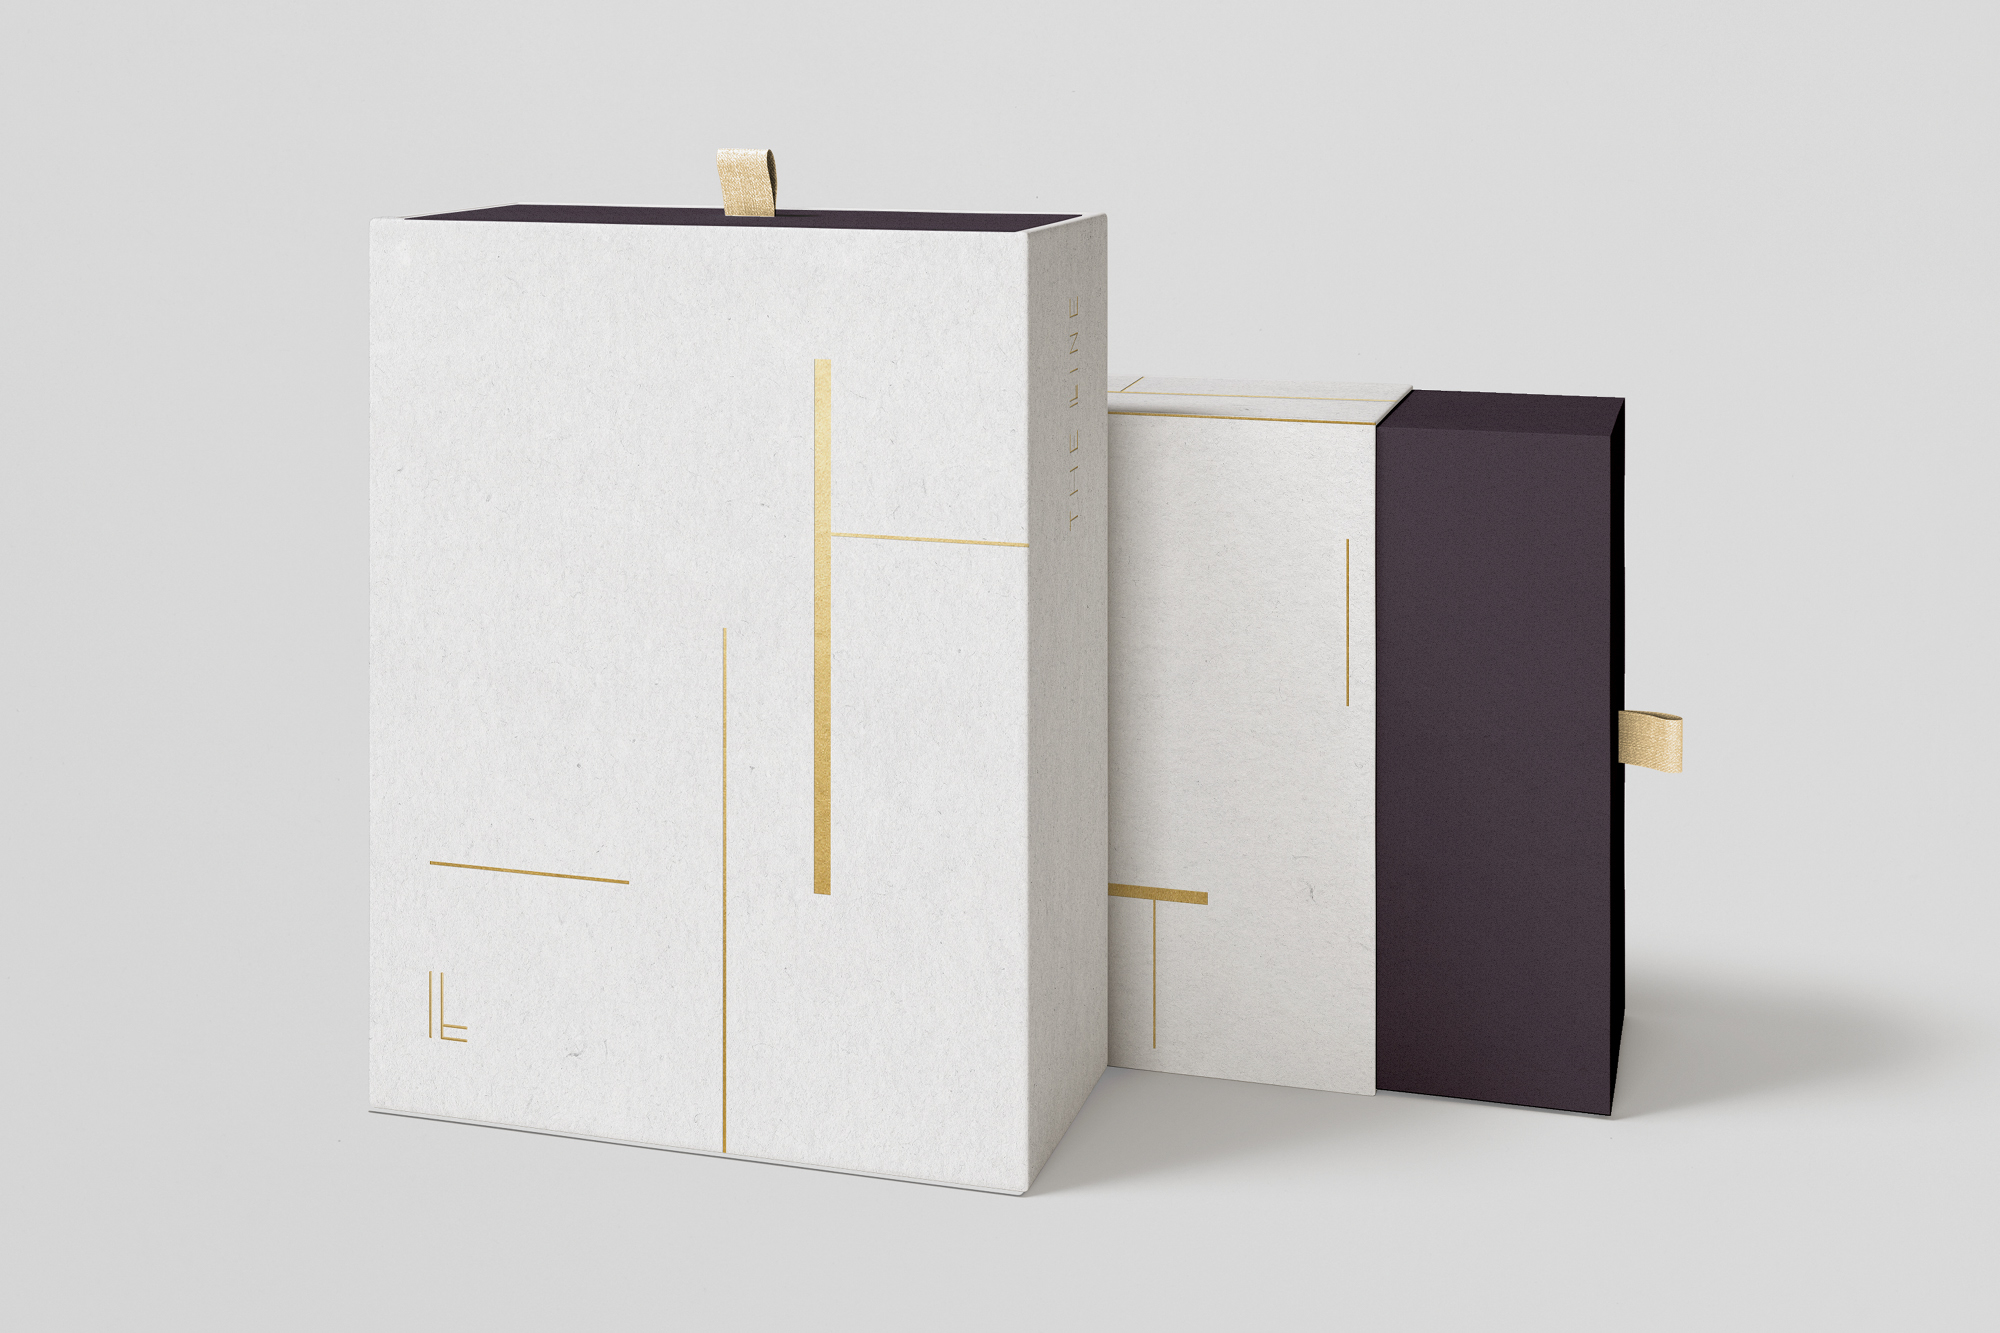 The Line | New Brand Identity & Packaging for Visual Bureau based in ...